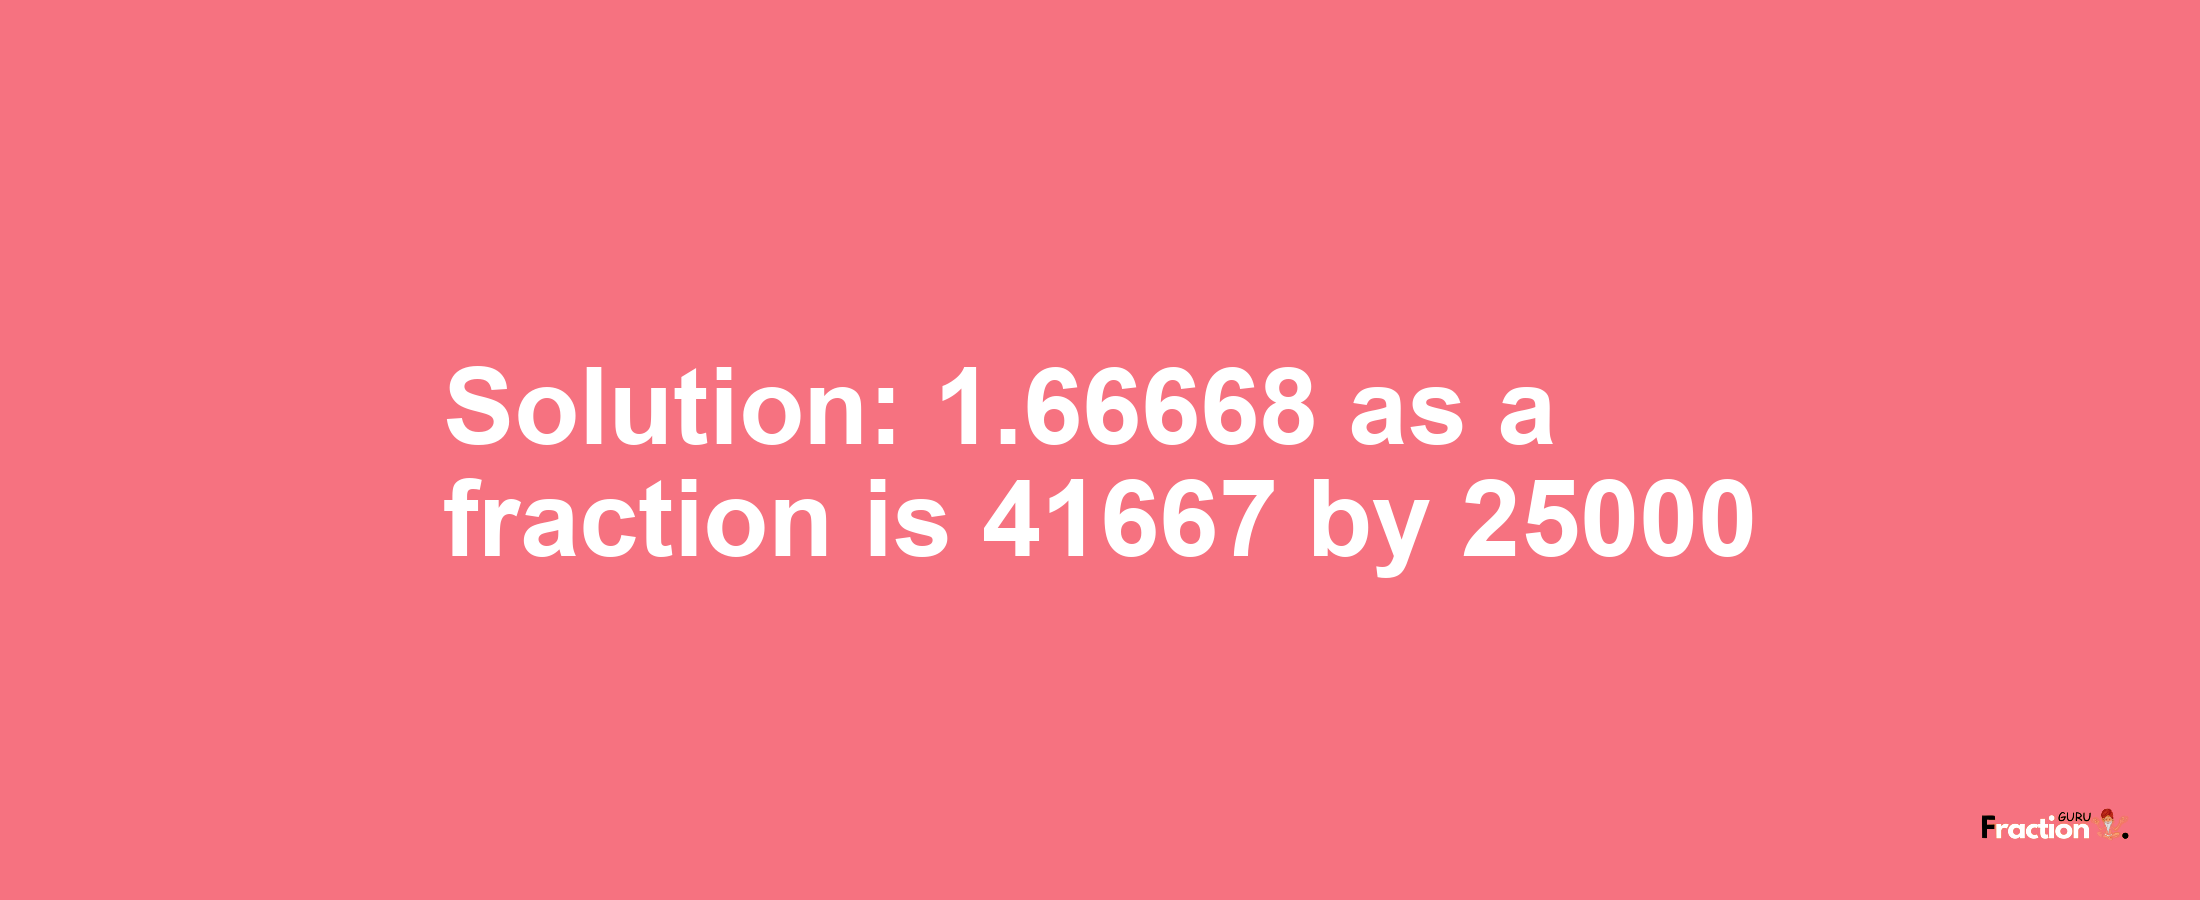 Solution:1.66668 as a fraction is 41667/25000